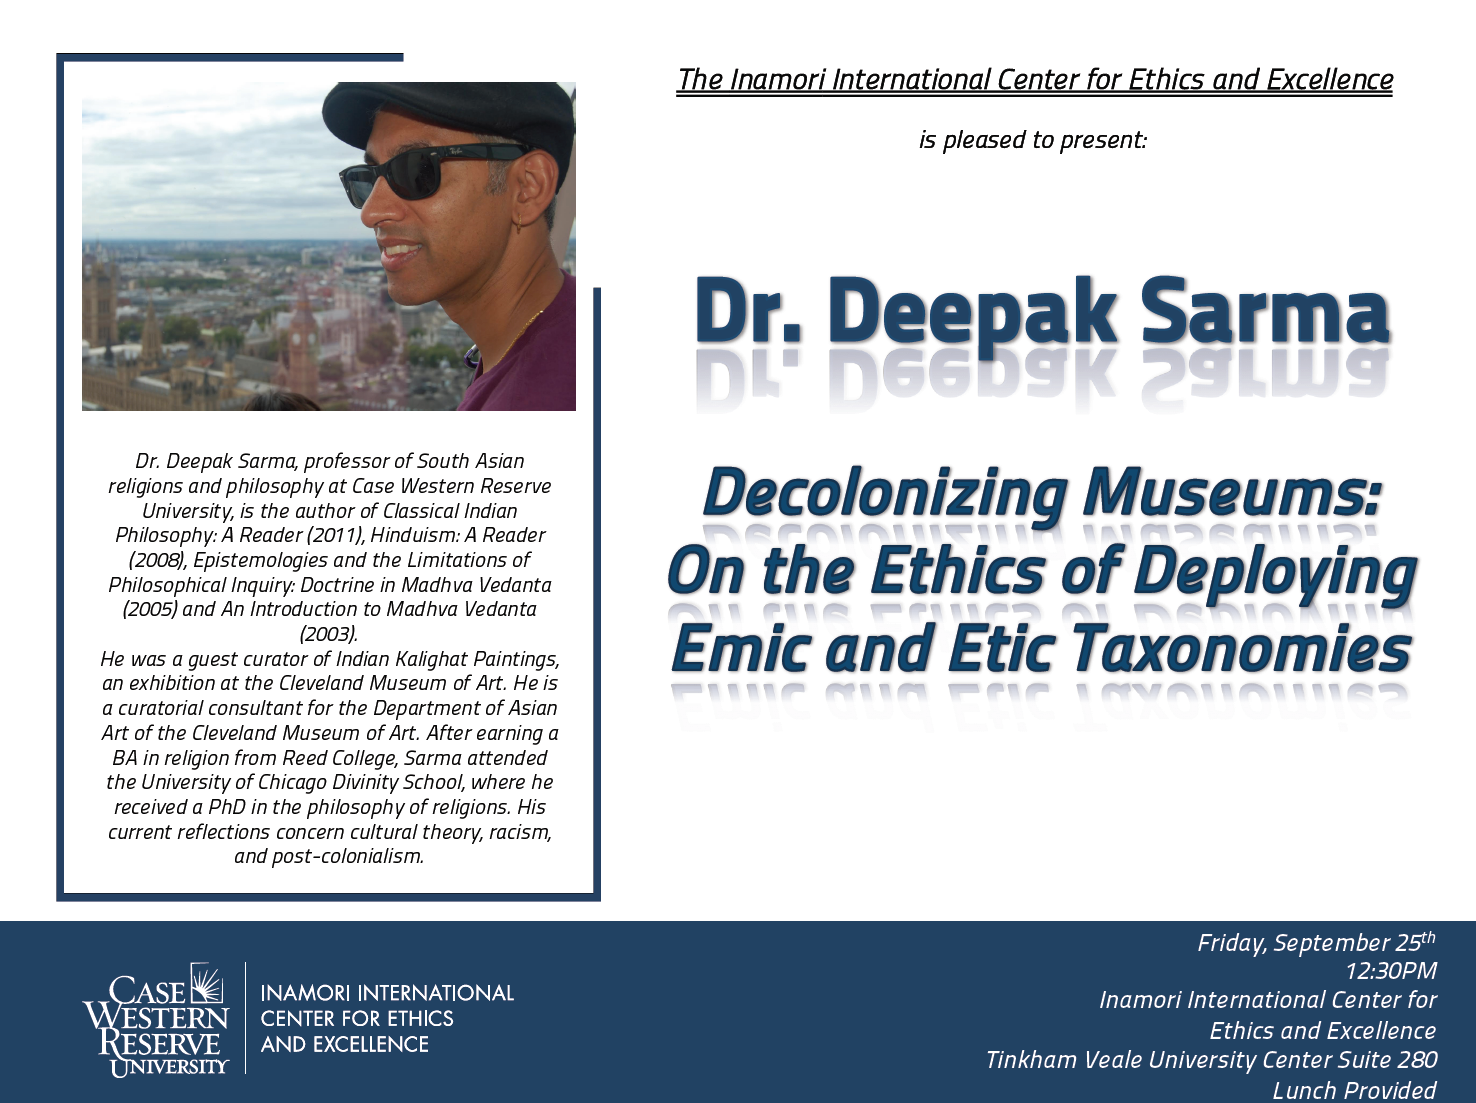 Dr. Deepak Sarma, Decolonizing Museums: On the Ethics of Deploying Emic and Etic Taxonomies, Dr. Deepak Sarma, professor of South Asian religions and philosophy at Case Western Reserve University, is the author of Classical Indian Philosophy: A Reader (2011), Epistemologies and the Limitations of Philosophical Inquiry: Doctrine in Madhava Vedanta (2005) and an Introduction to Madhava Vedanta (2003). He was a guest curator of Indian Kalighat Paintings, an exhibition at the Cleveland Museum of Art.